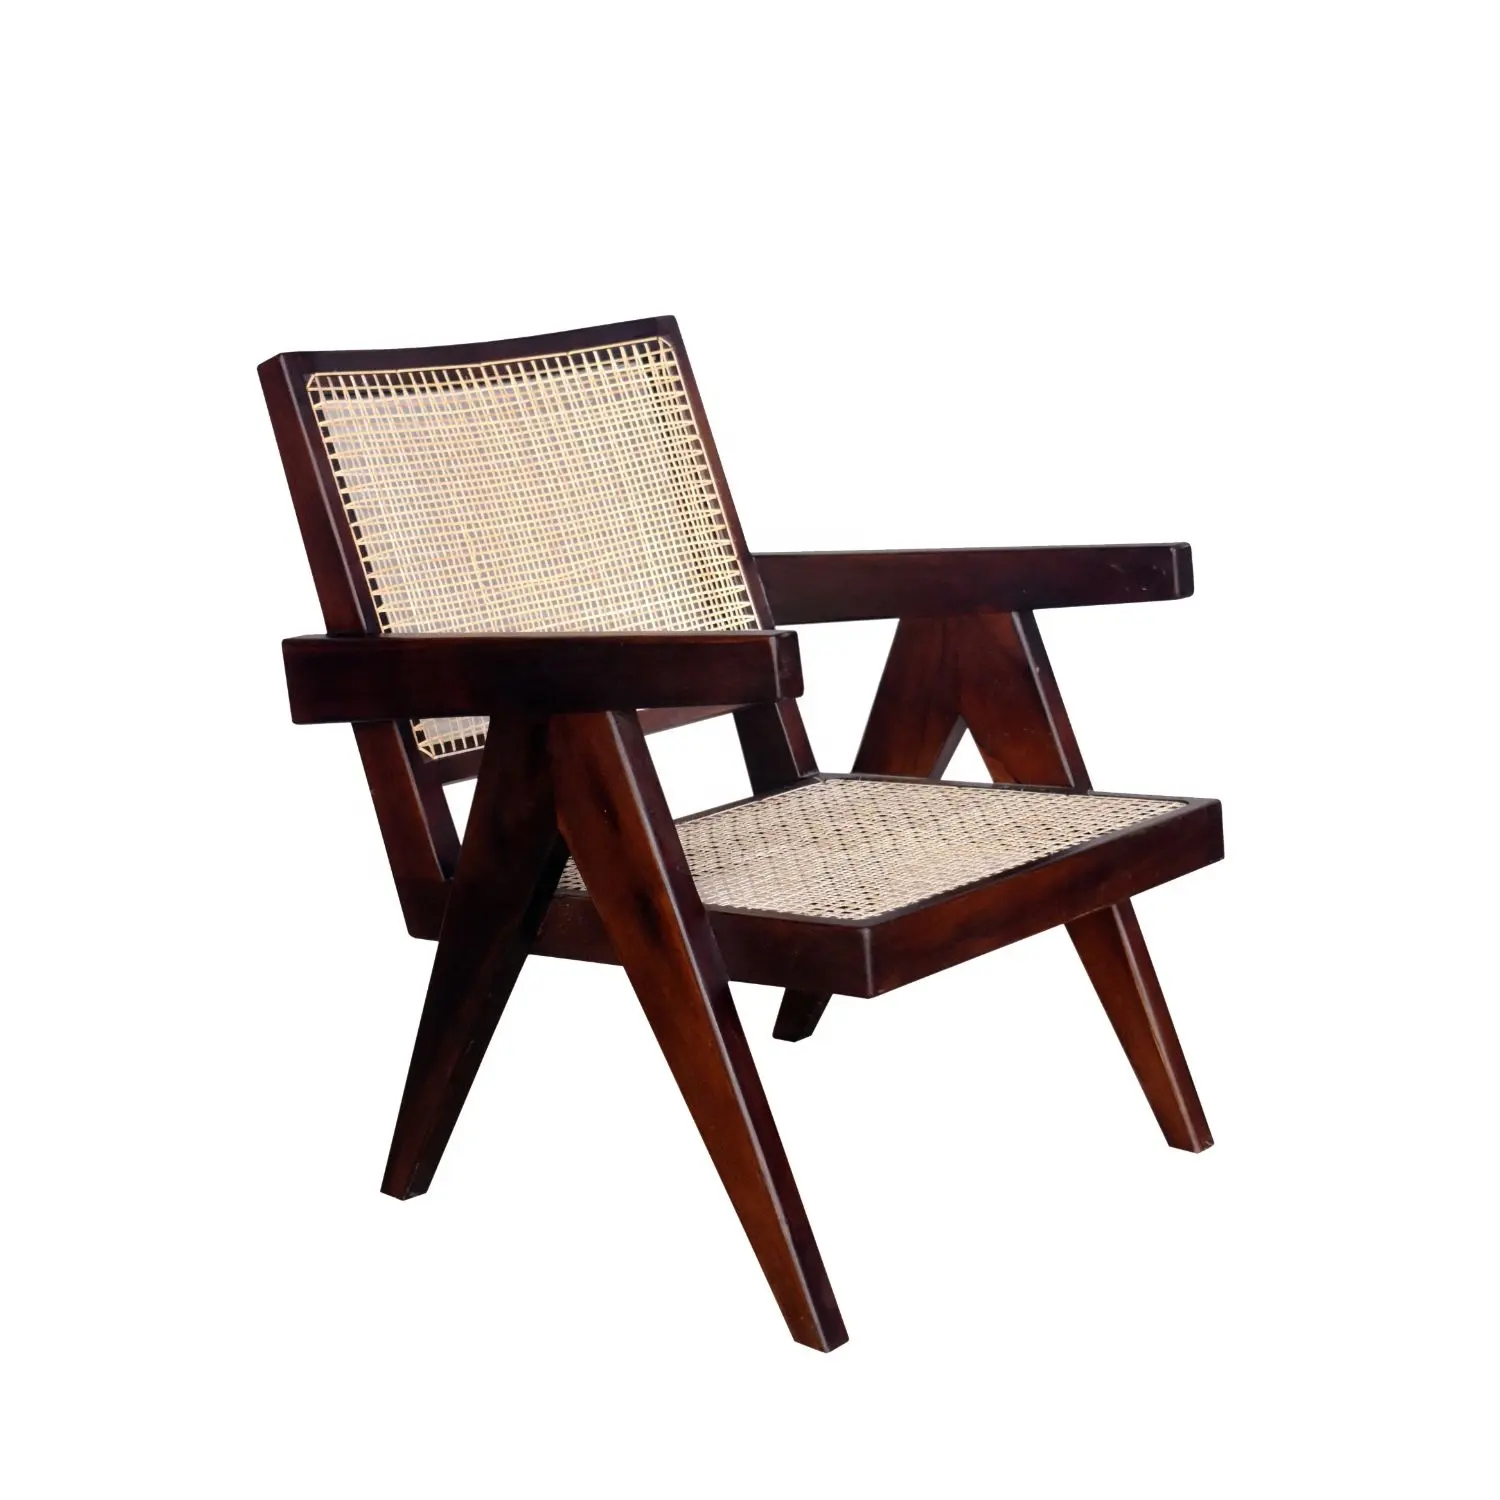 Replica Pierre Jeanneret Le Corbusier Teakwood Relax Chair in Antique Finish Aged Finish